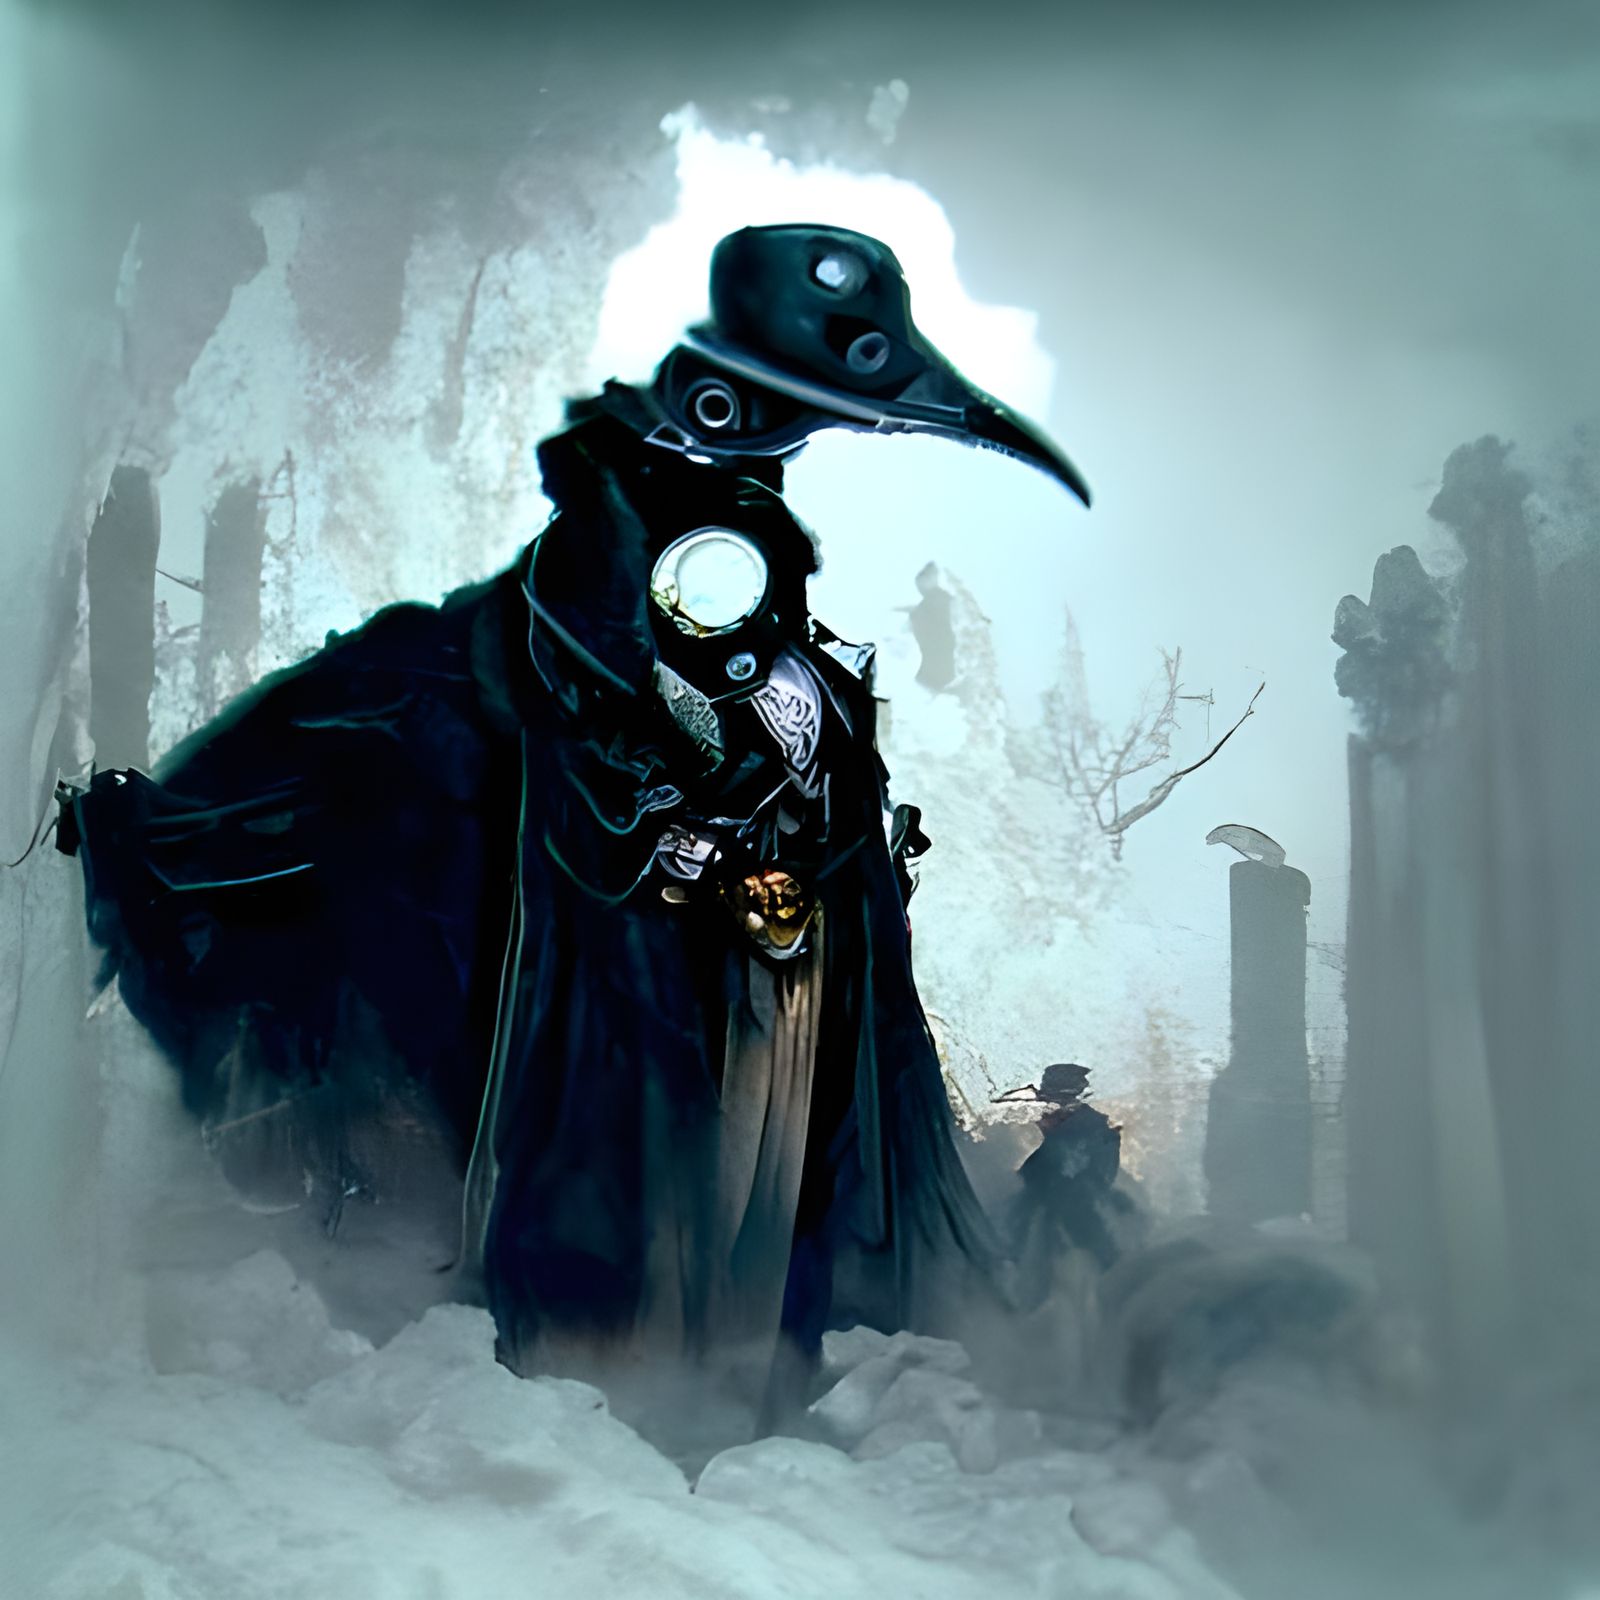 Steampunk Plague Doctor Looking Over Graveyard